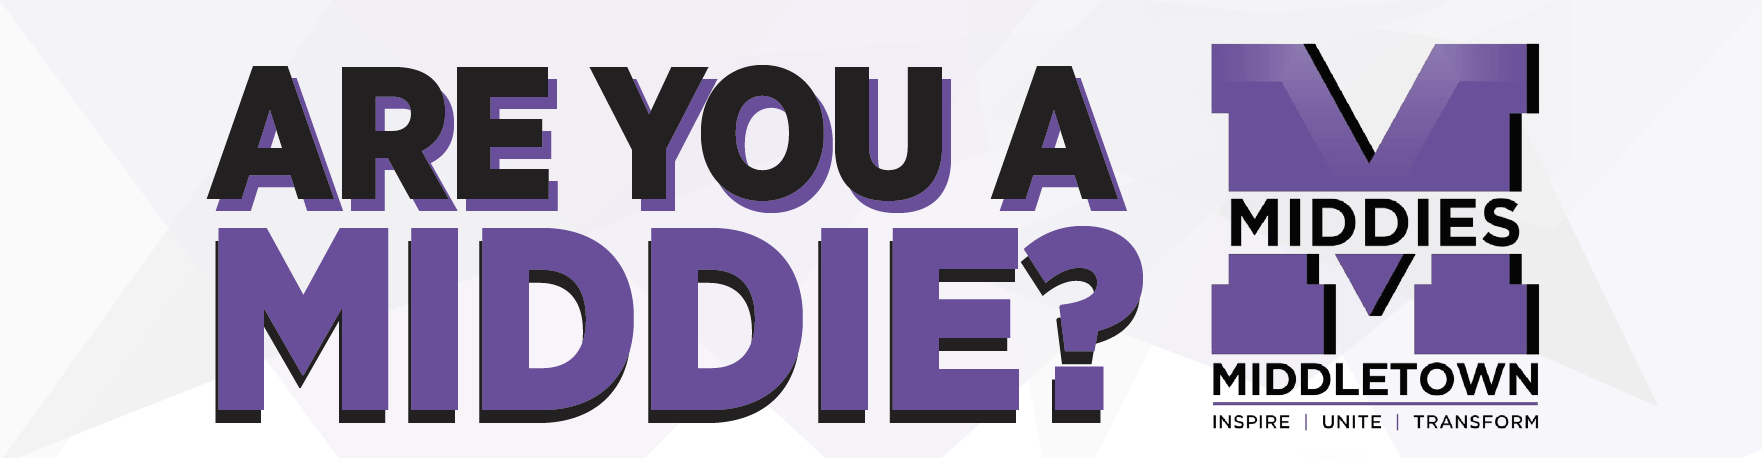 Are you a Middie?